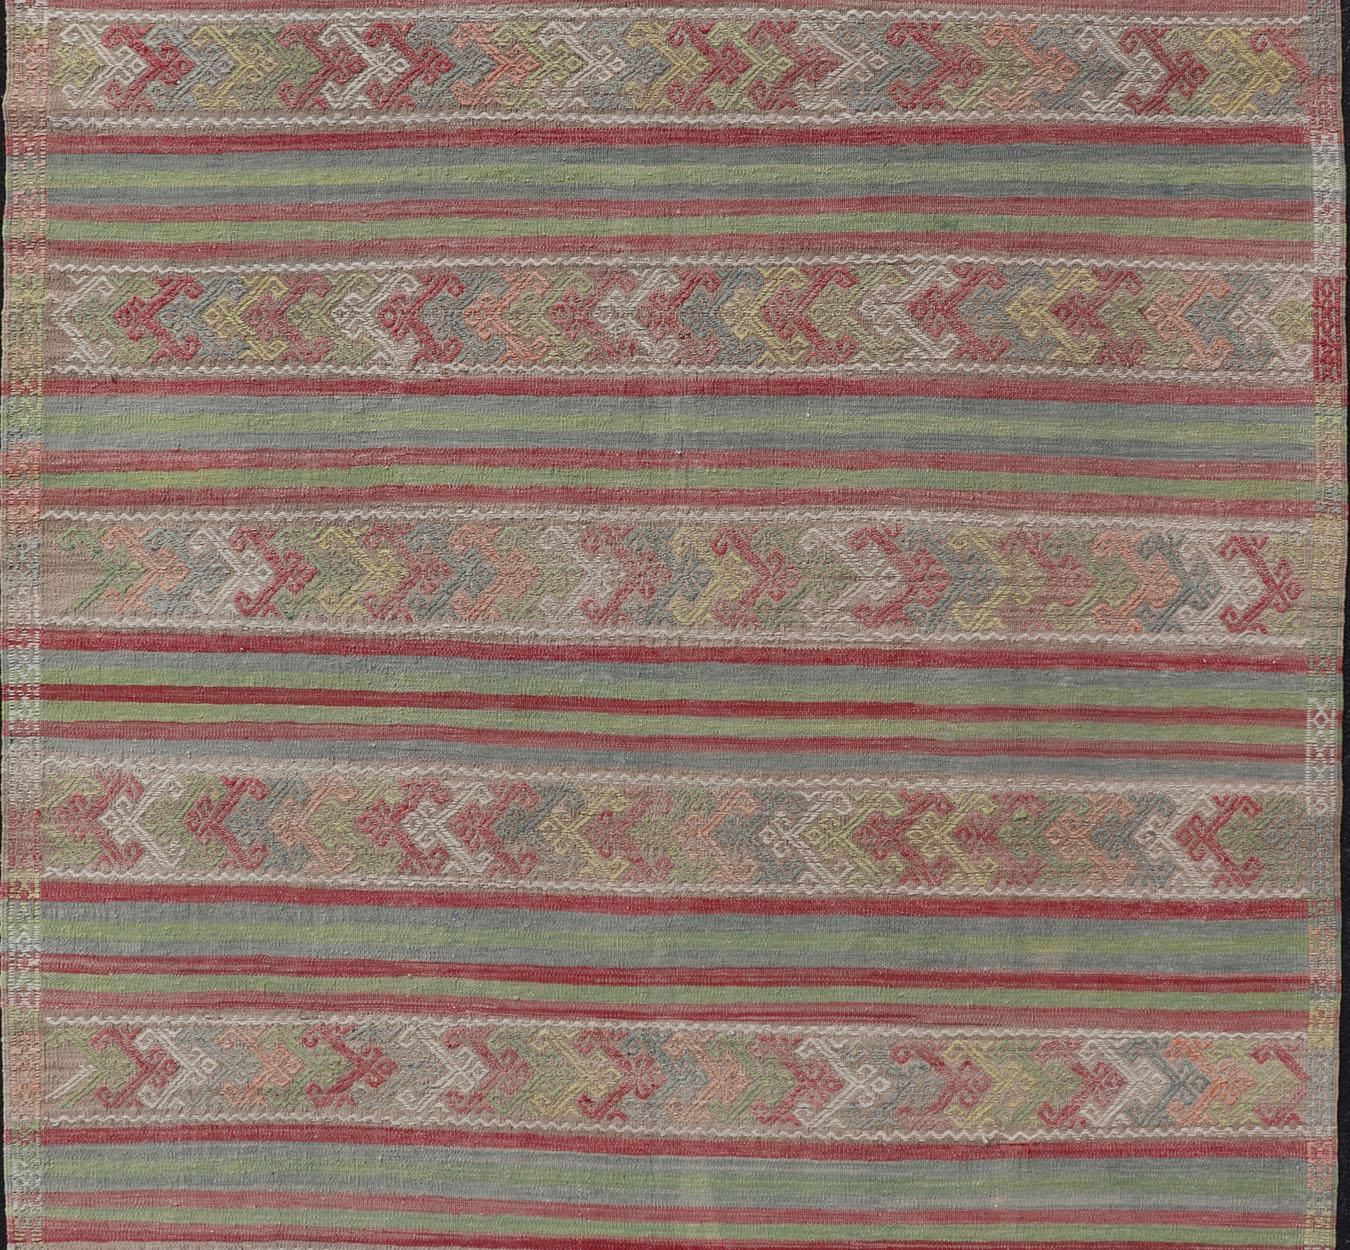 Colorful Vintage Embroidered Kilim with Stripes and Alternating Geometric Motifs In Good Condition For Sale In Atlanta, GA